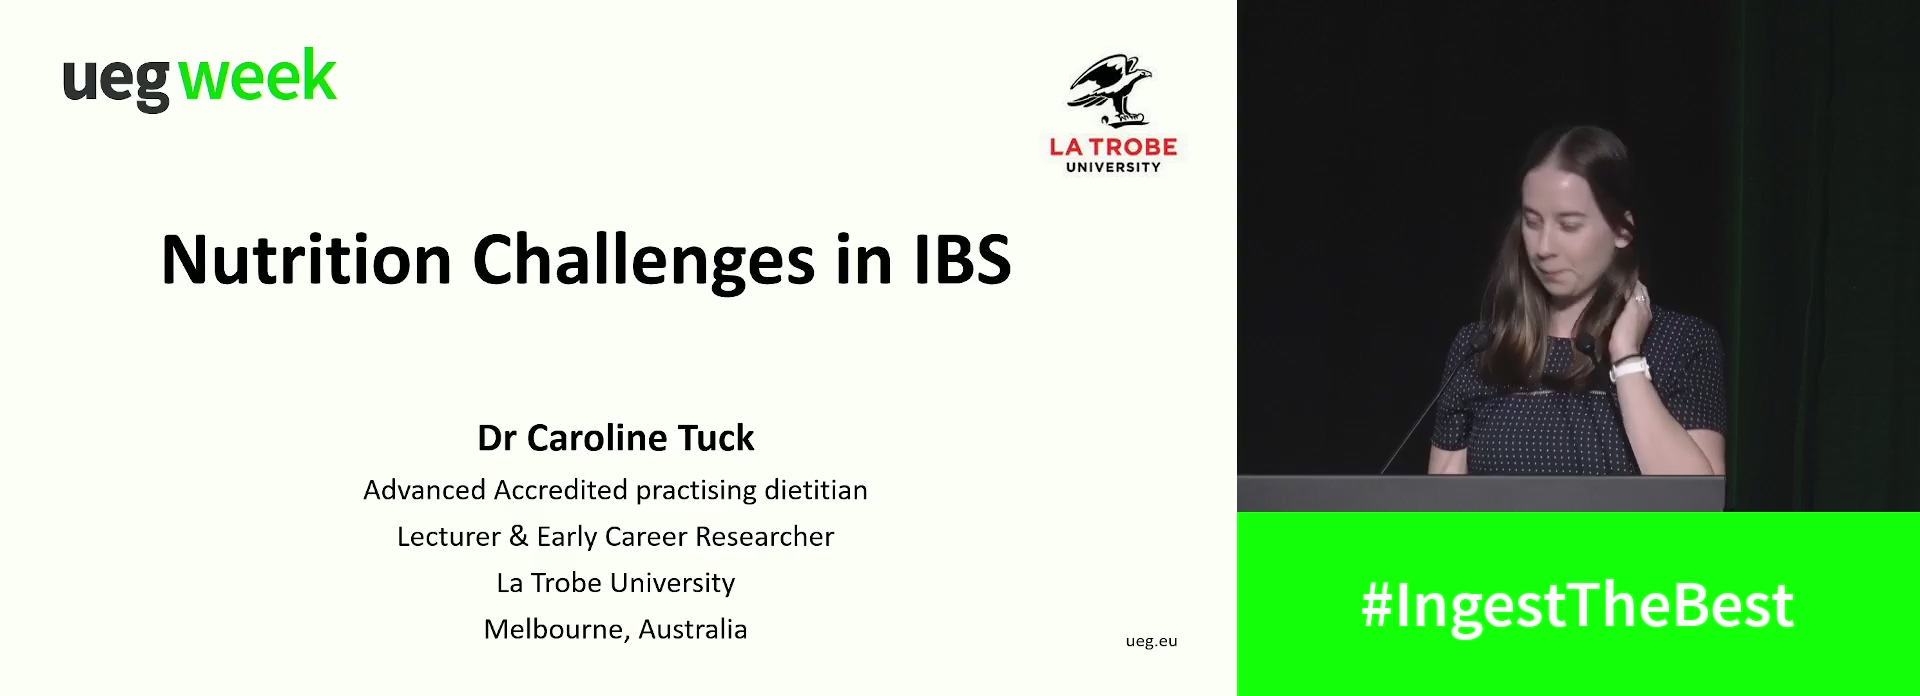 Nutritional challenges in IBS